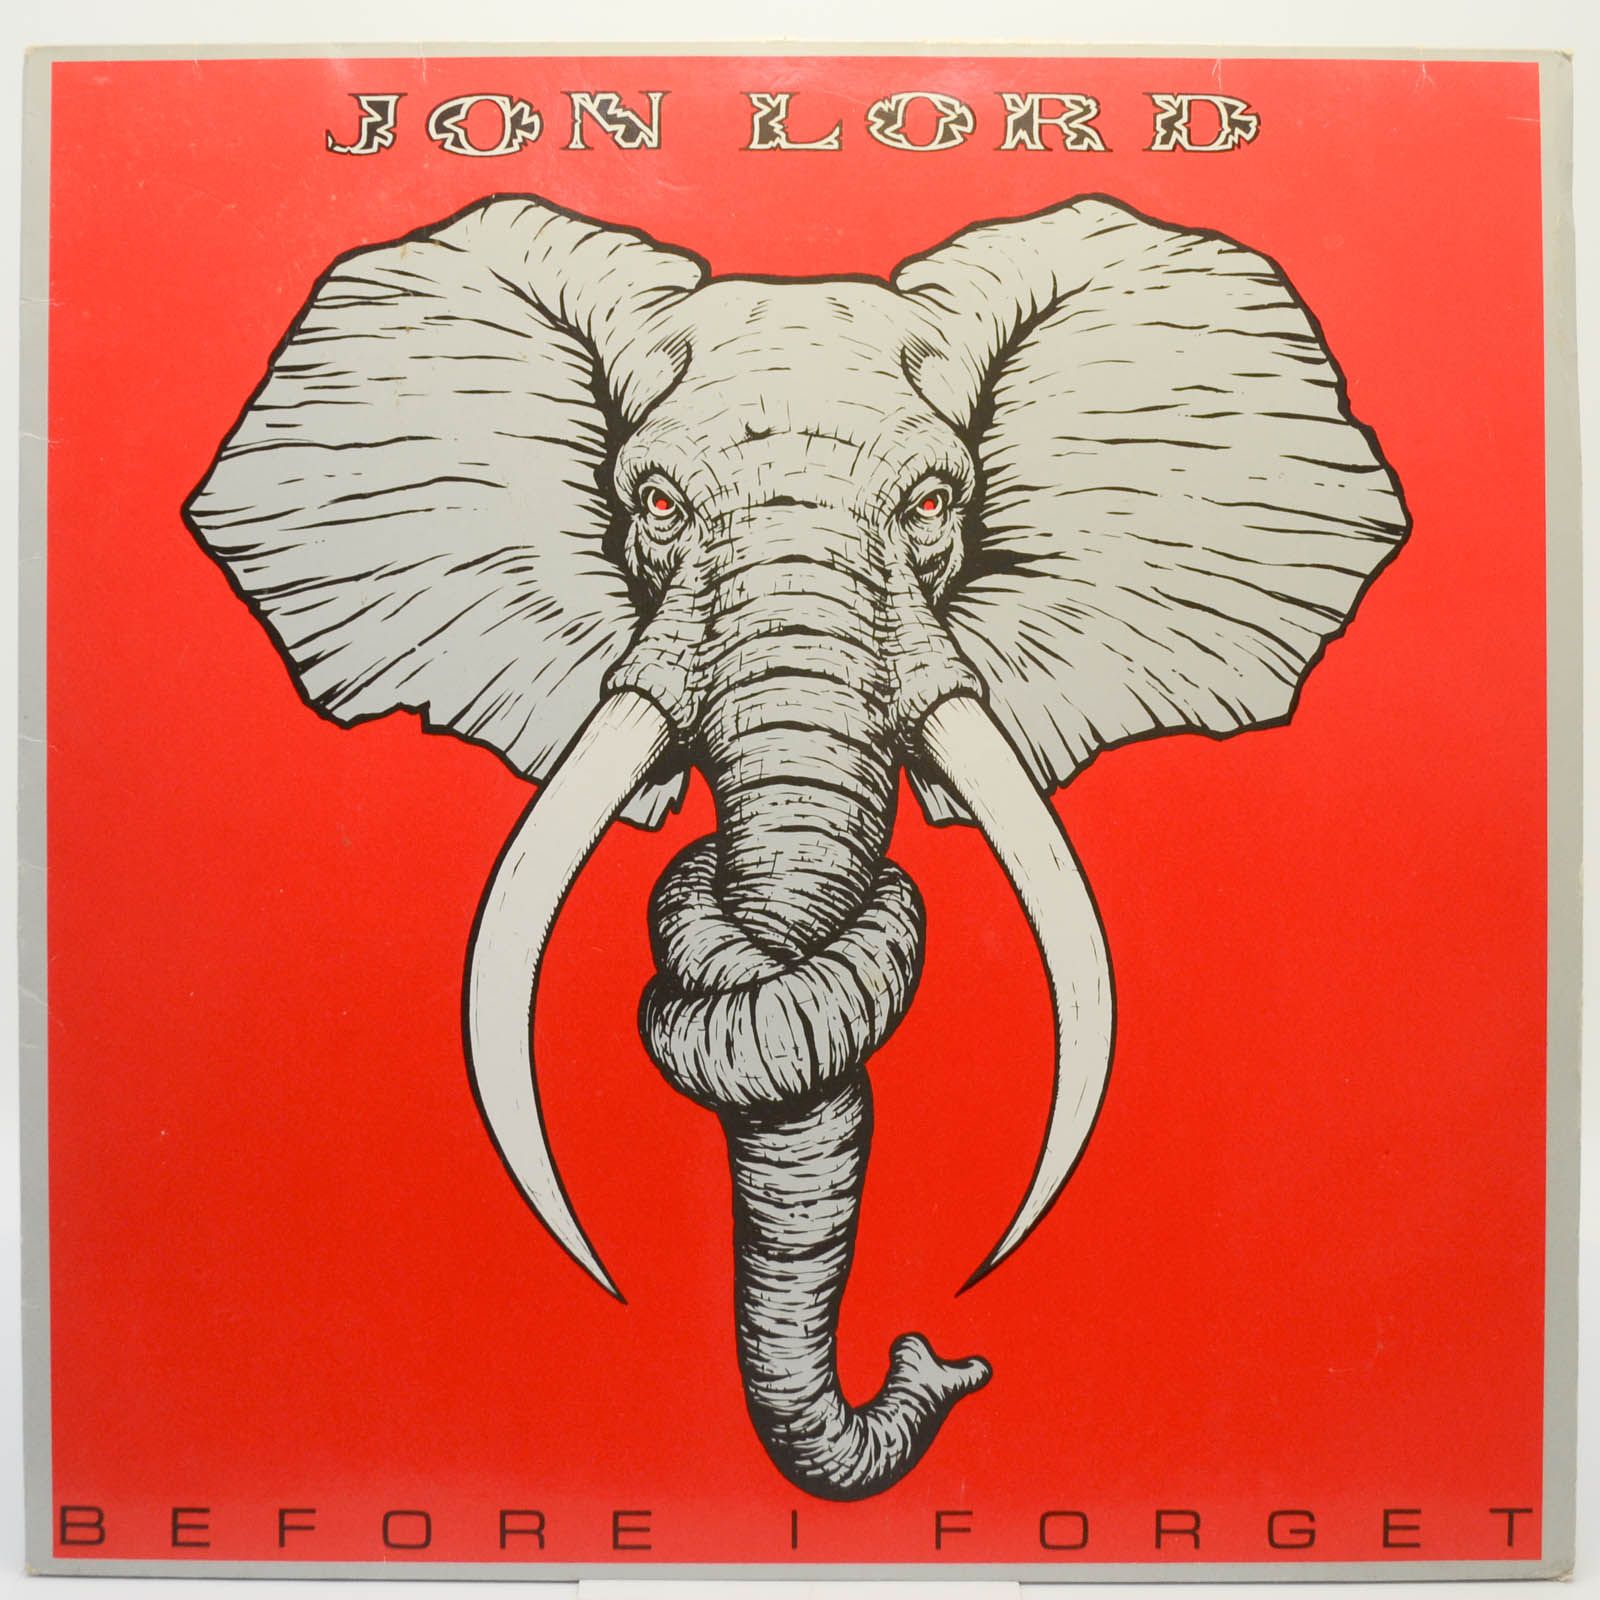 Jon Lord — Before I Forget, 1982